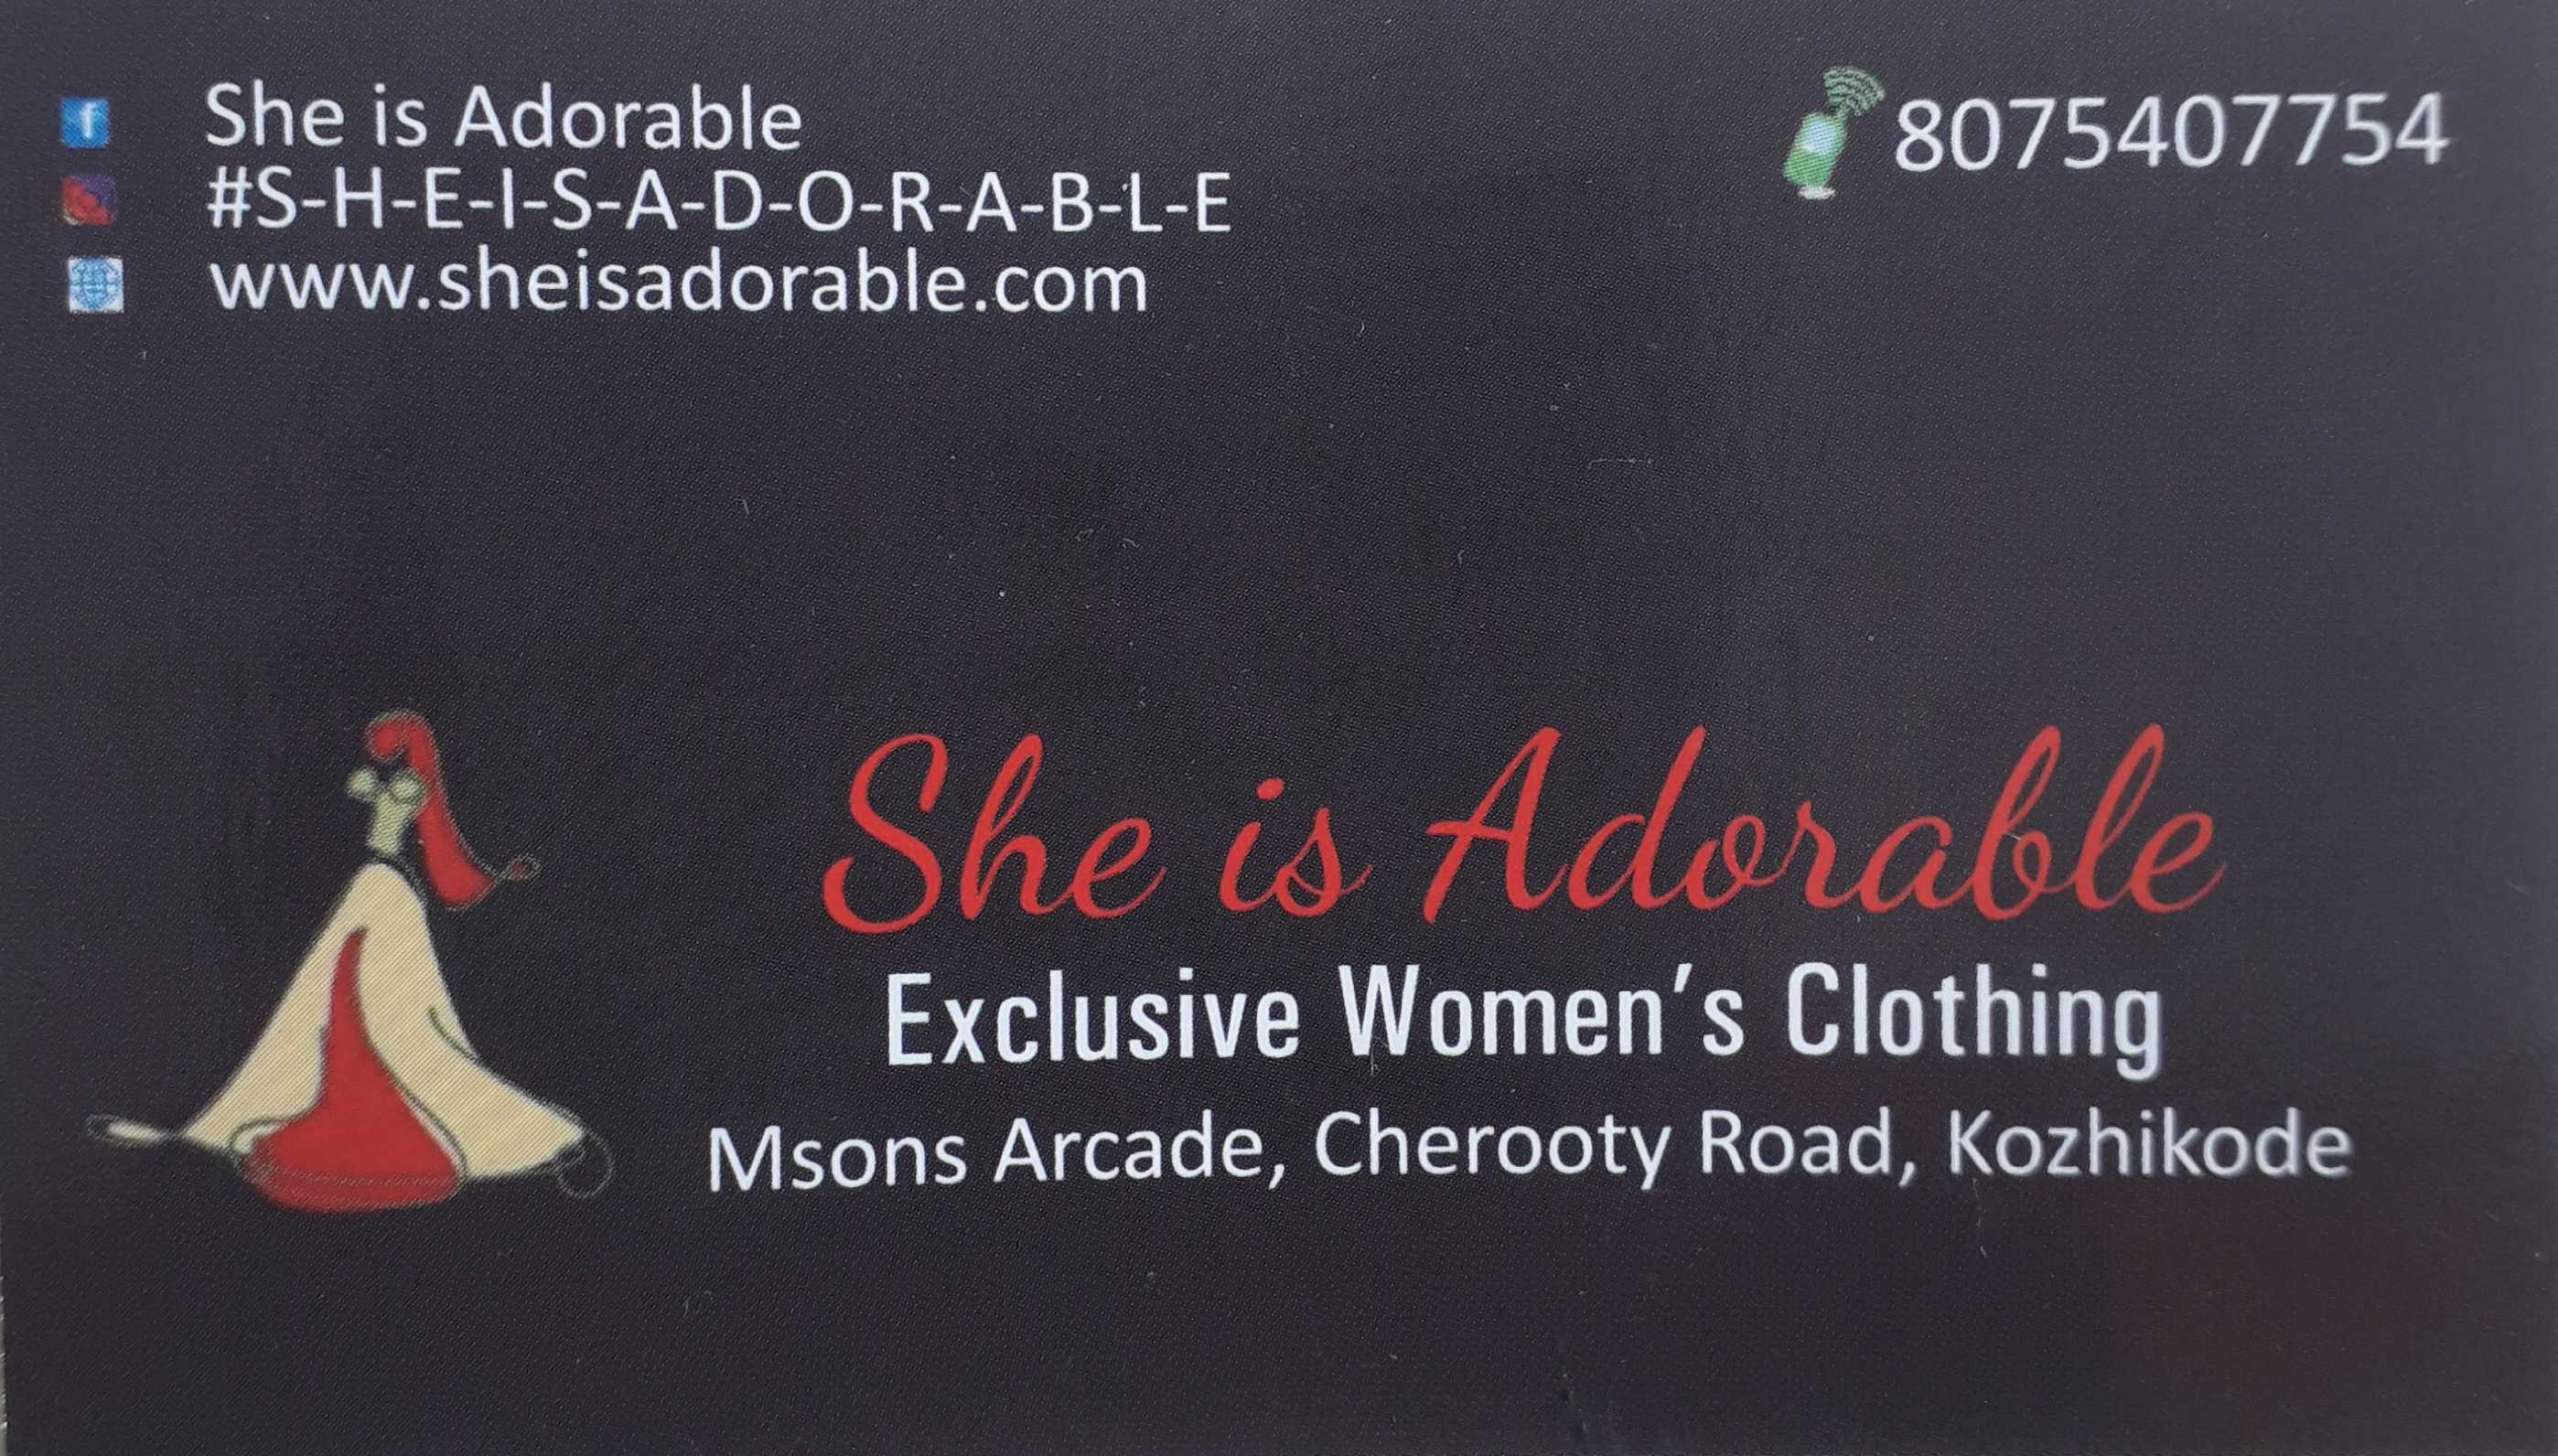 SHE IS ADORABLE exclusive women's clothing, BOUTIQUE,  service in Kozhikode Town, Kozhikode